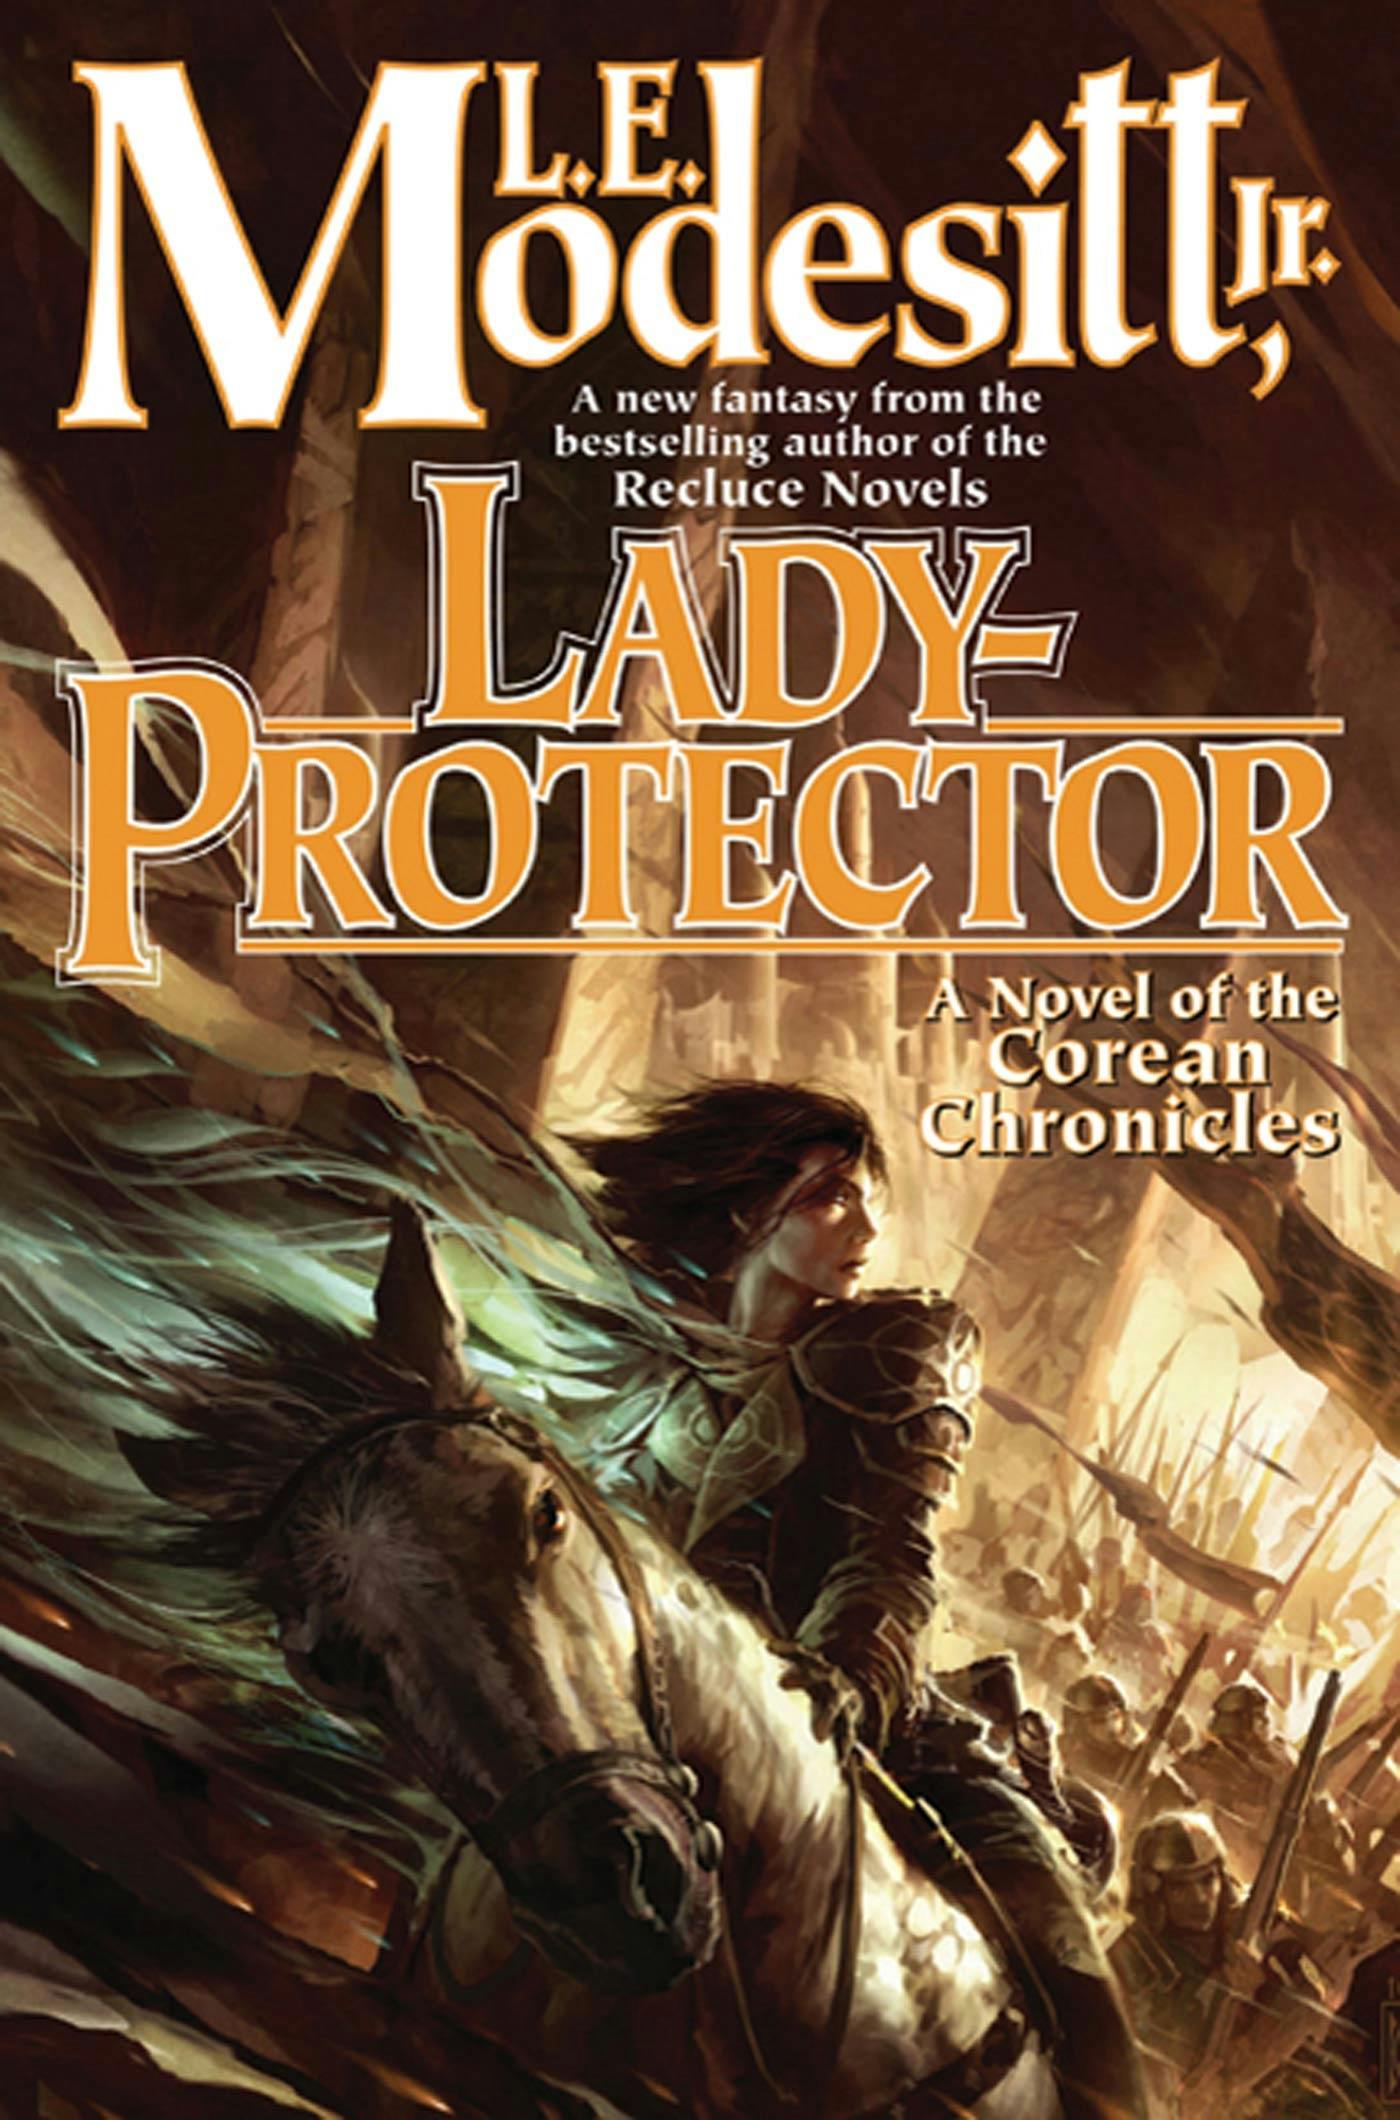 Cover for the book titled as: Lady-Protector